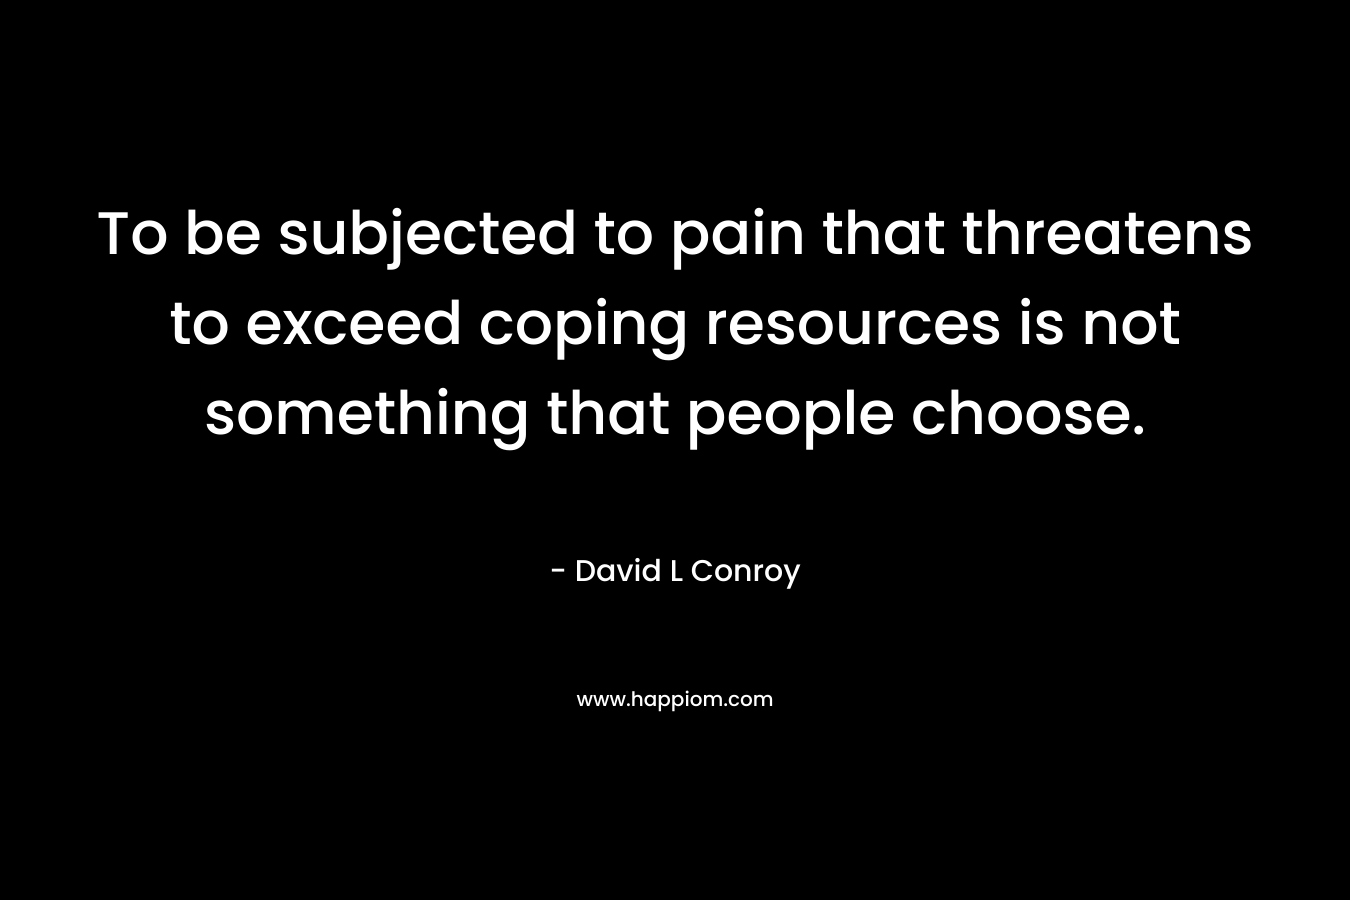 To be subjected to pain that threatens to exceed coping resources is not something that people choose. – David L Conroy